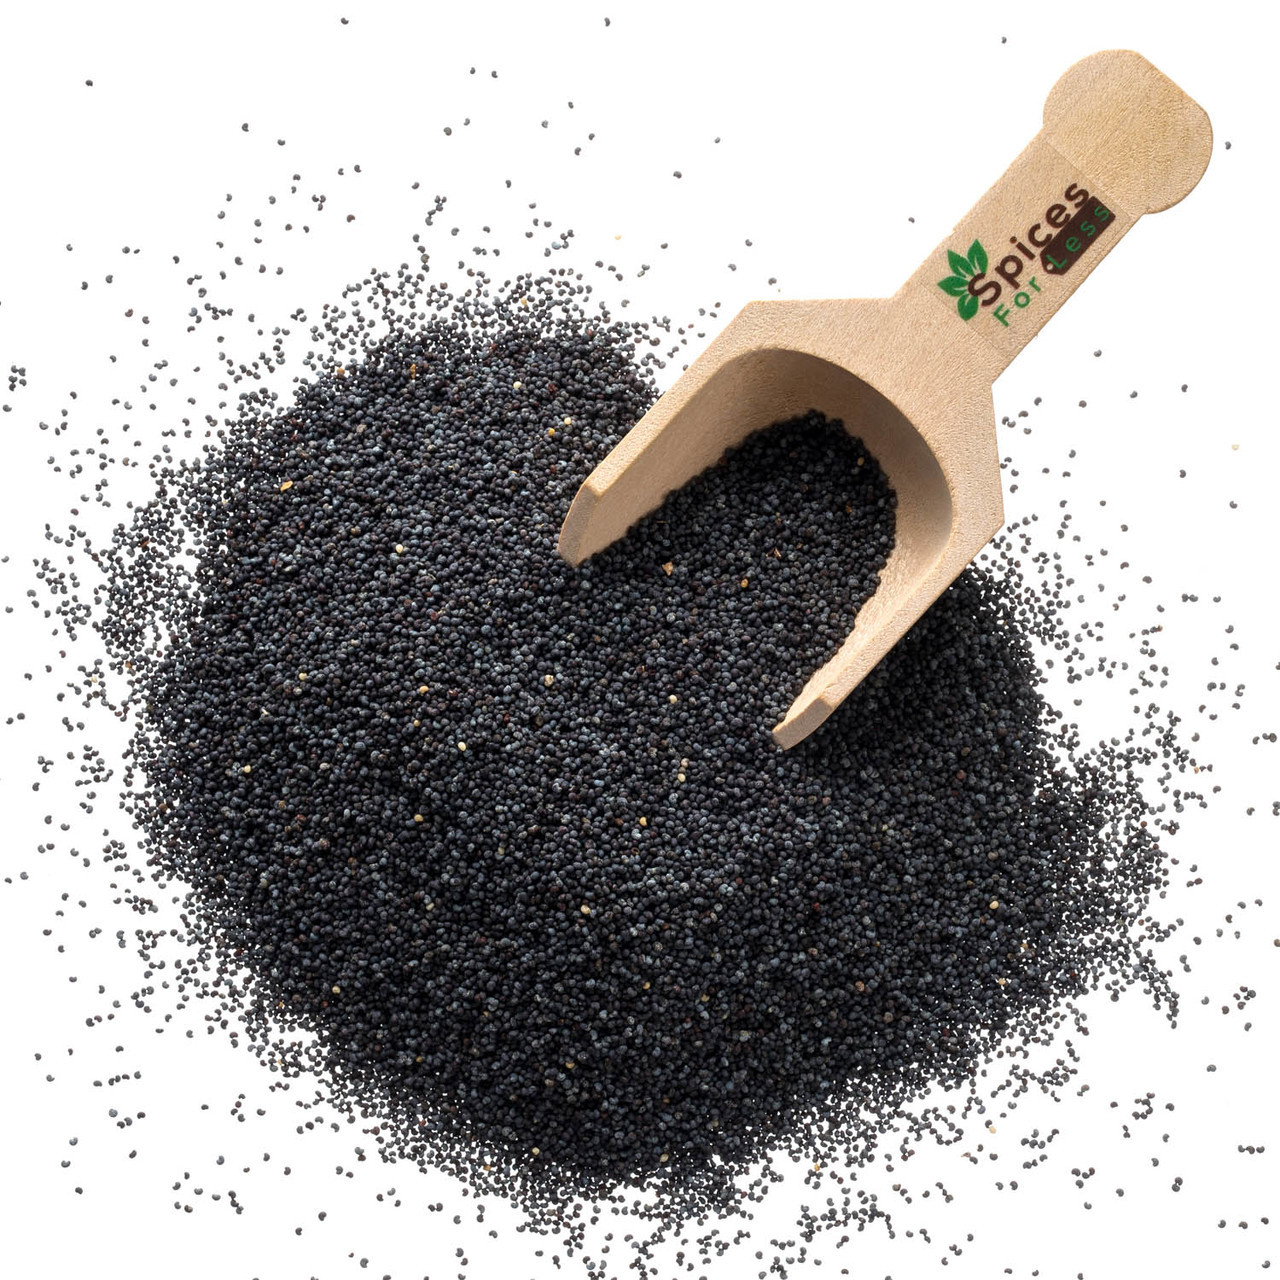 Order Whole Black Poppy Seeds - Discount Whole Black Poppy Seeds Online